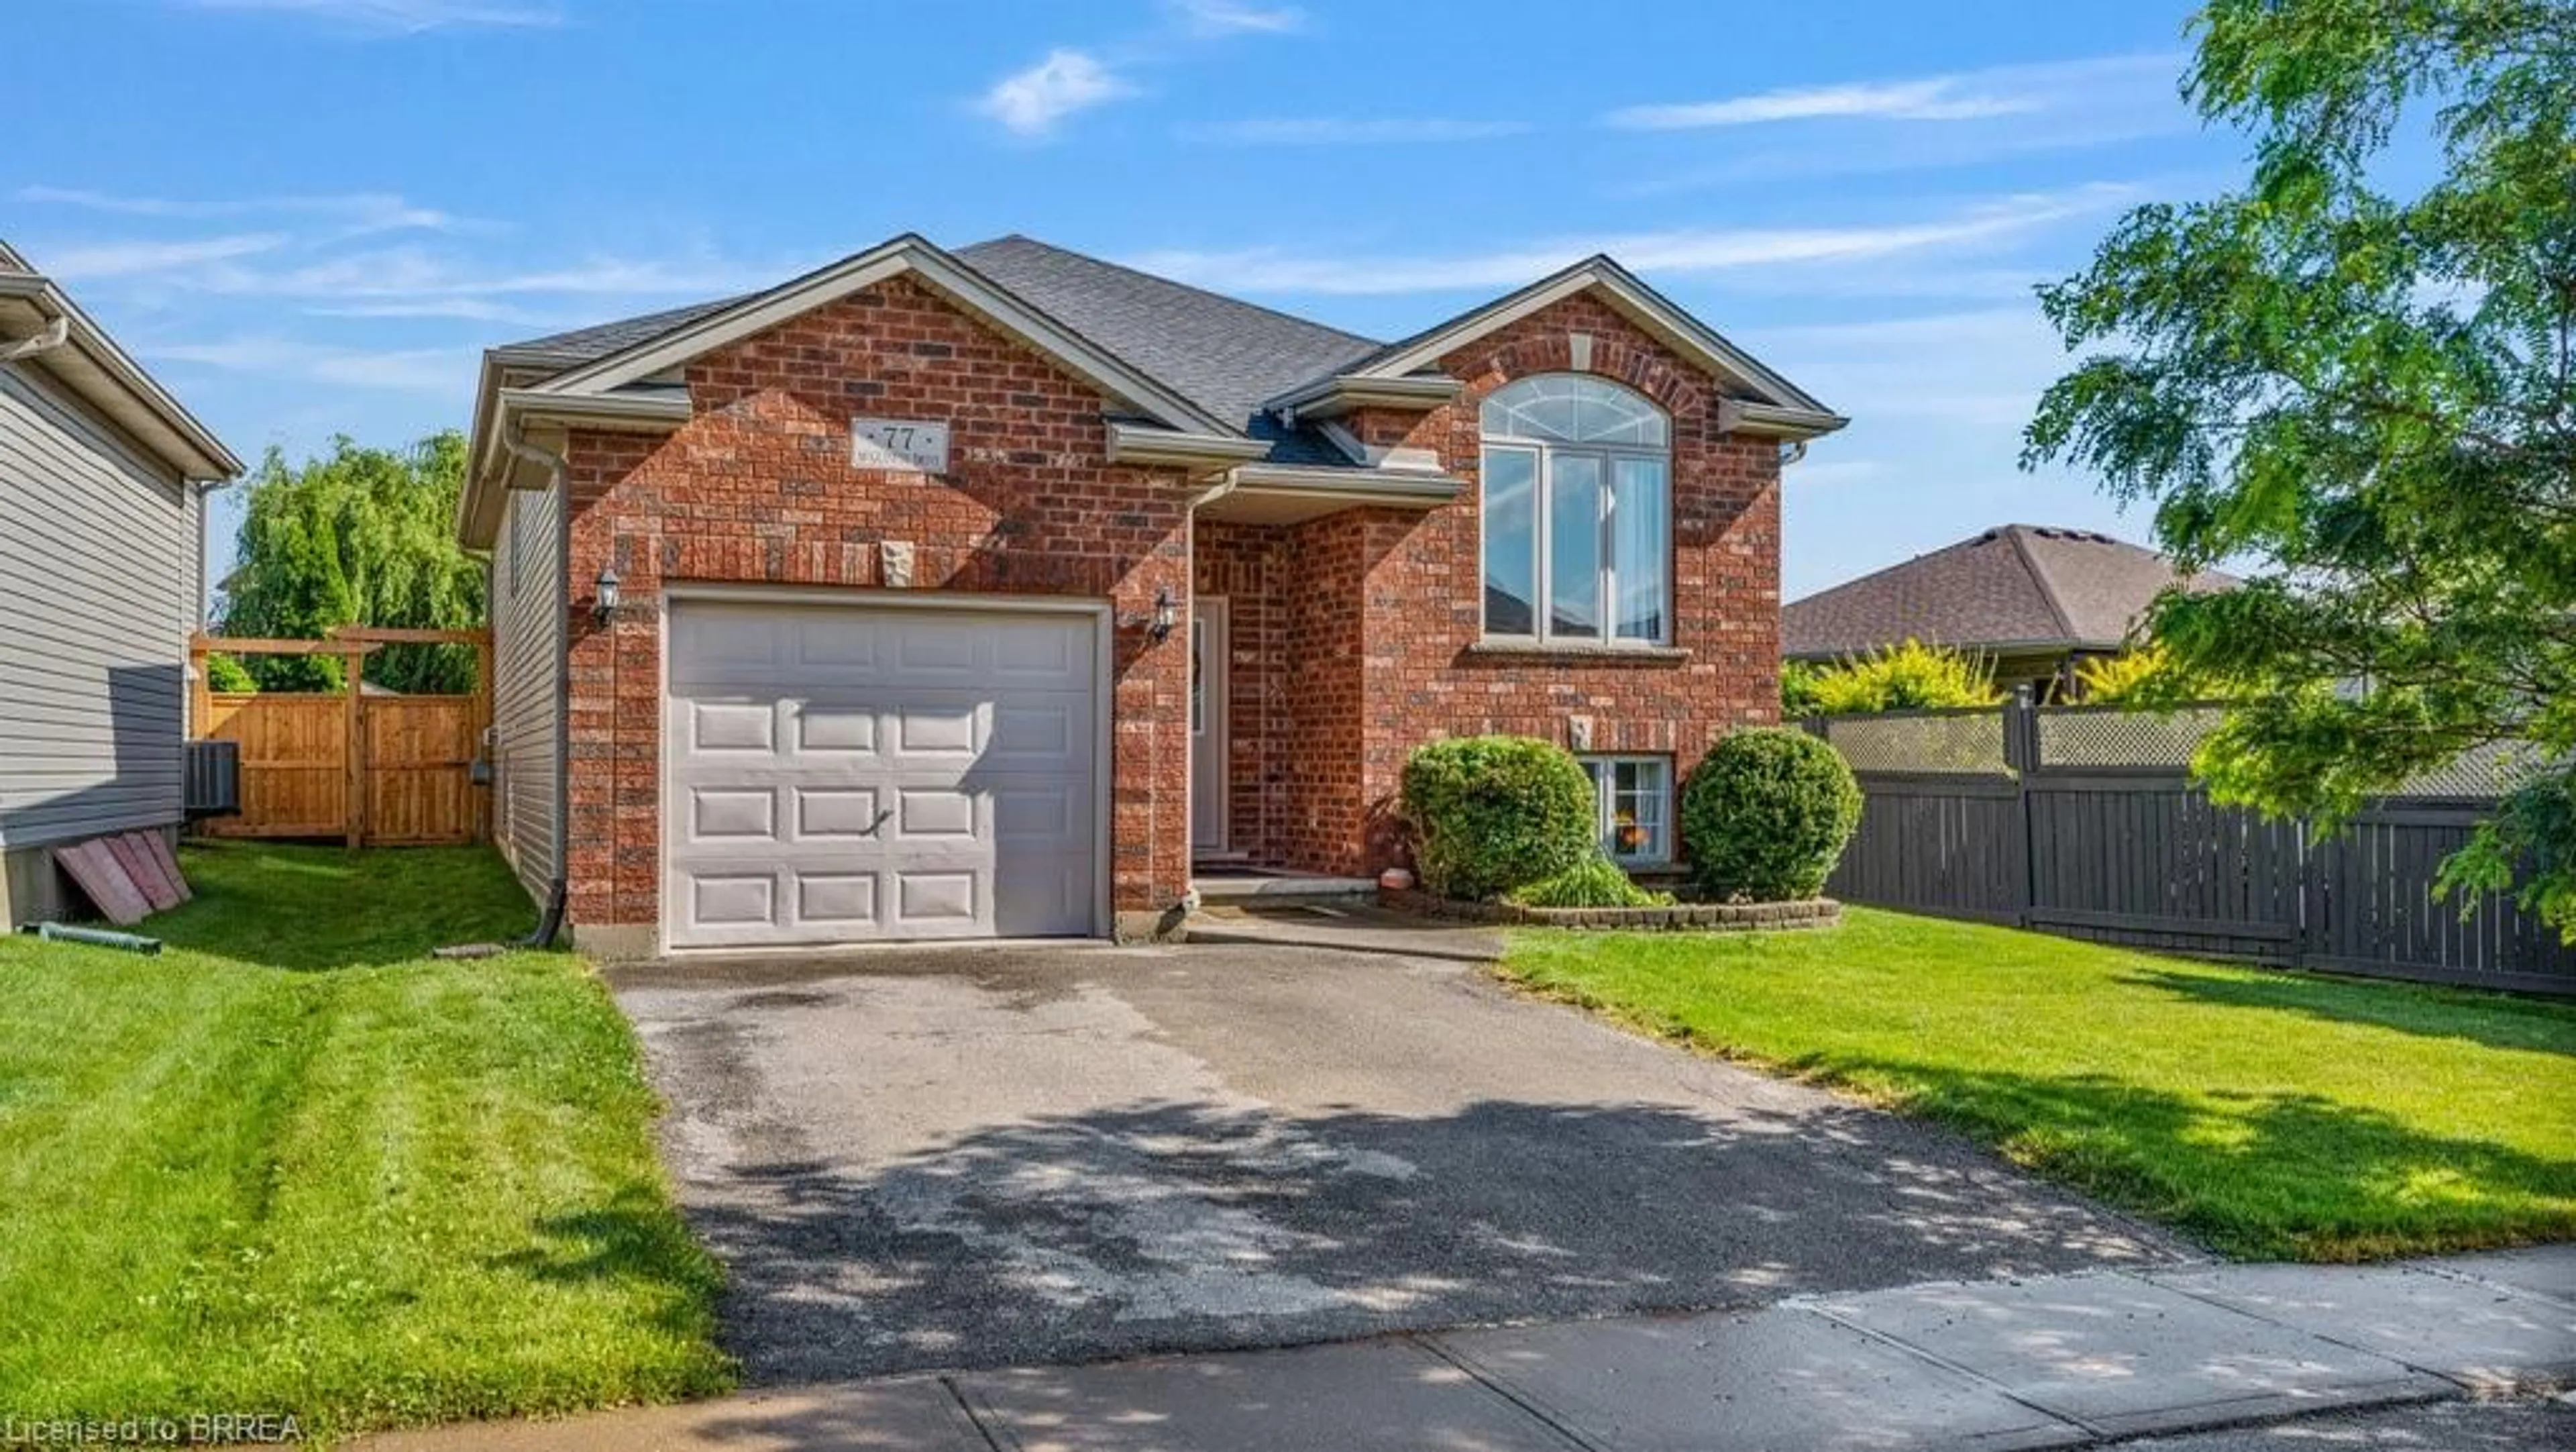 Home with brick exterior material for 77 Mcguiness Dr, Brantford Ontario N3T 6N5